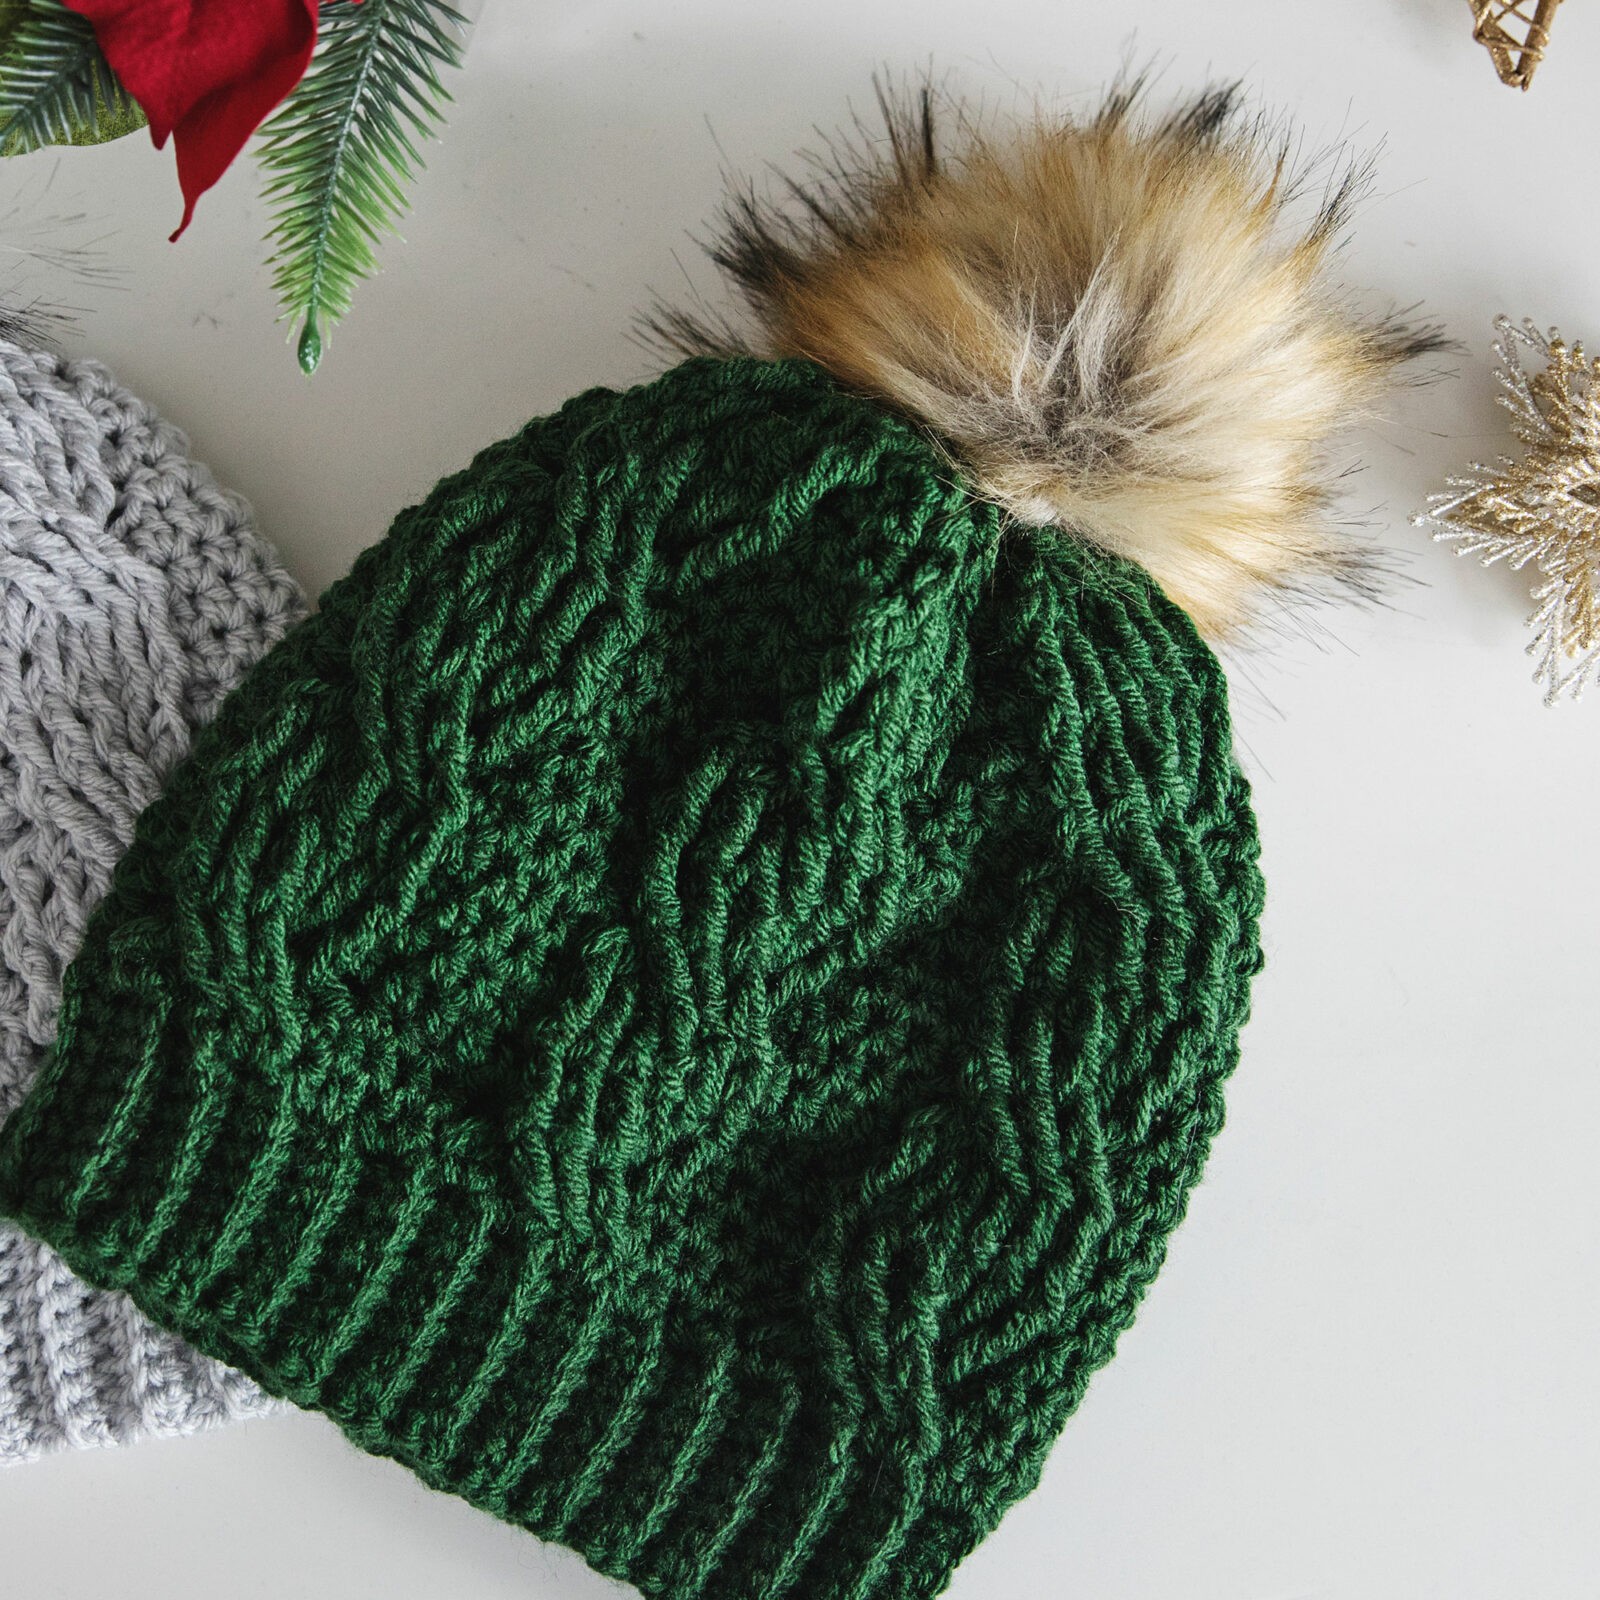 Crochet Beanie Hat Sizing Template (Free Printable)